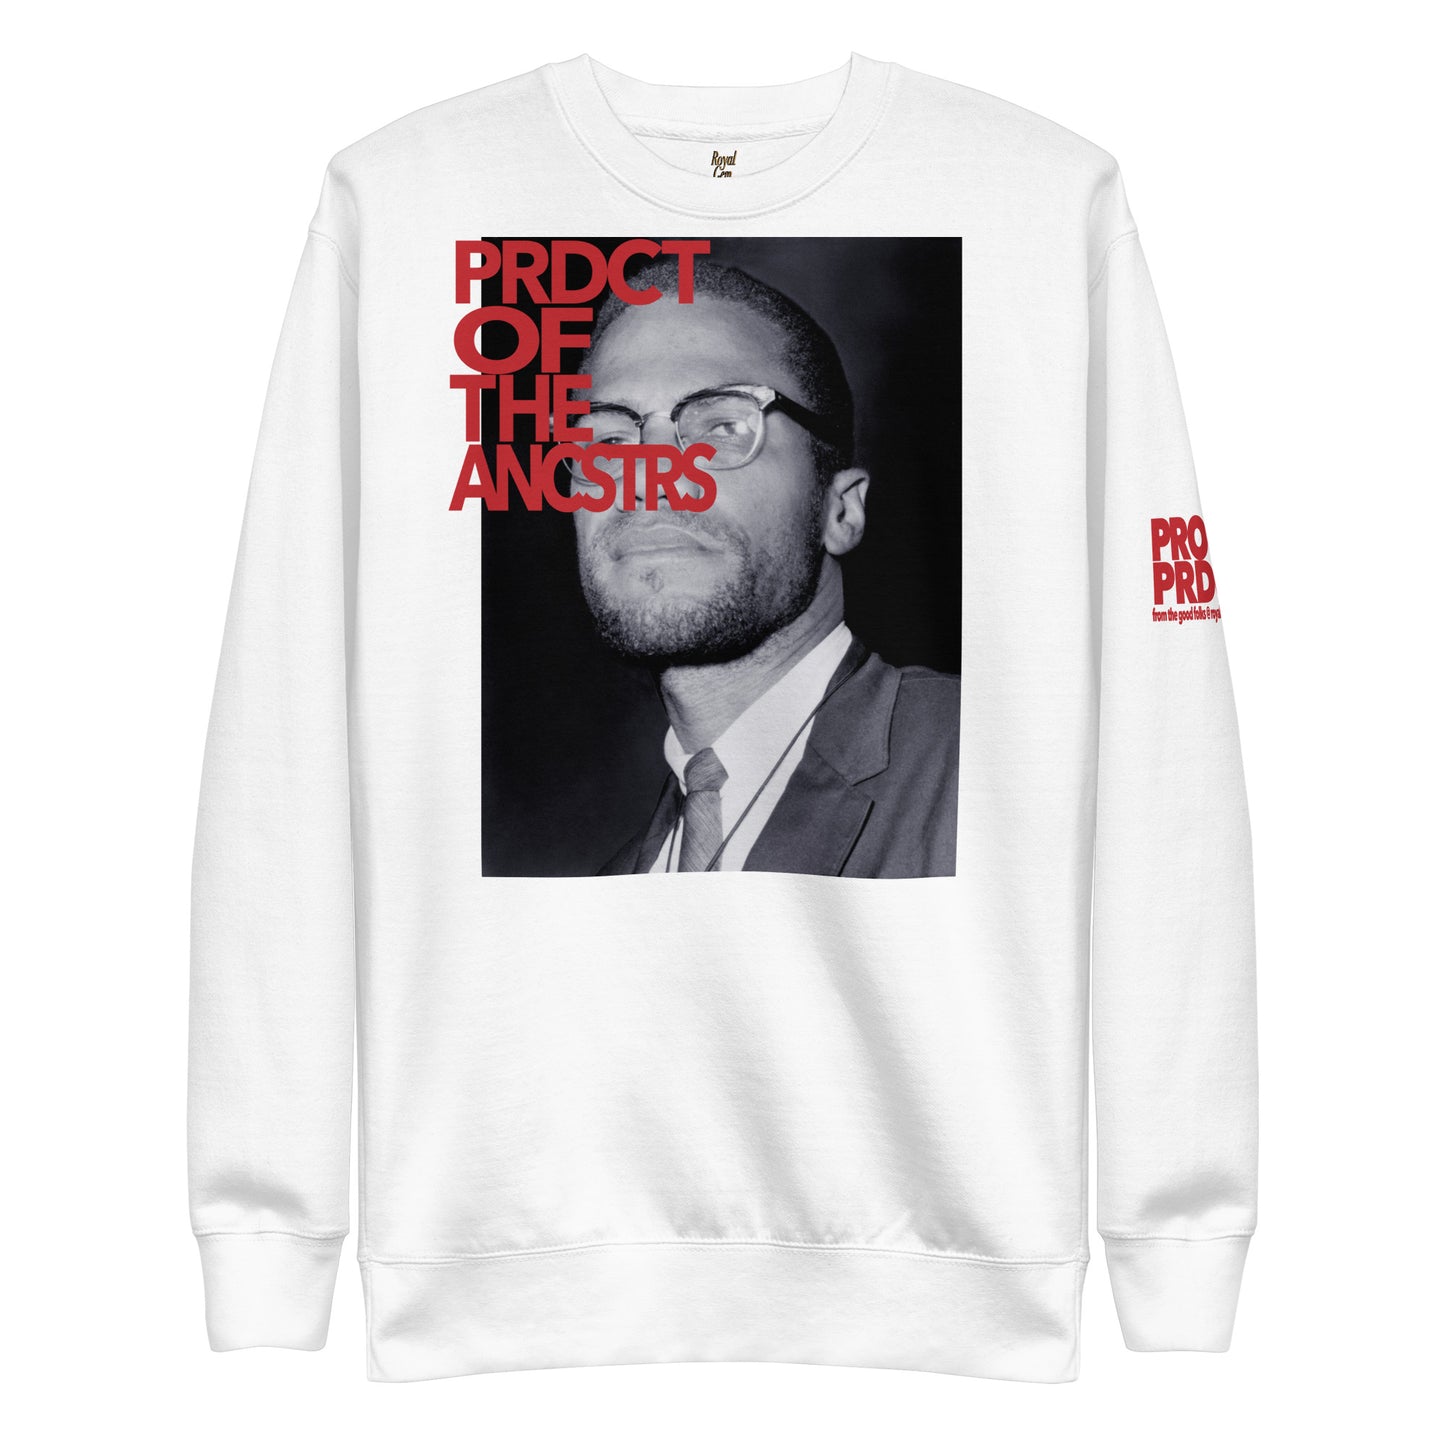 "Product of the Ancestors" Sweatshirt (Limited Edition)